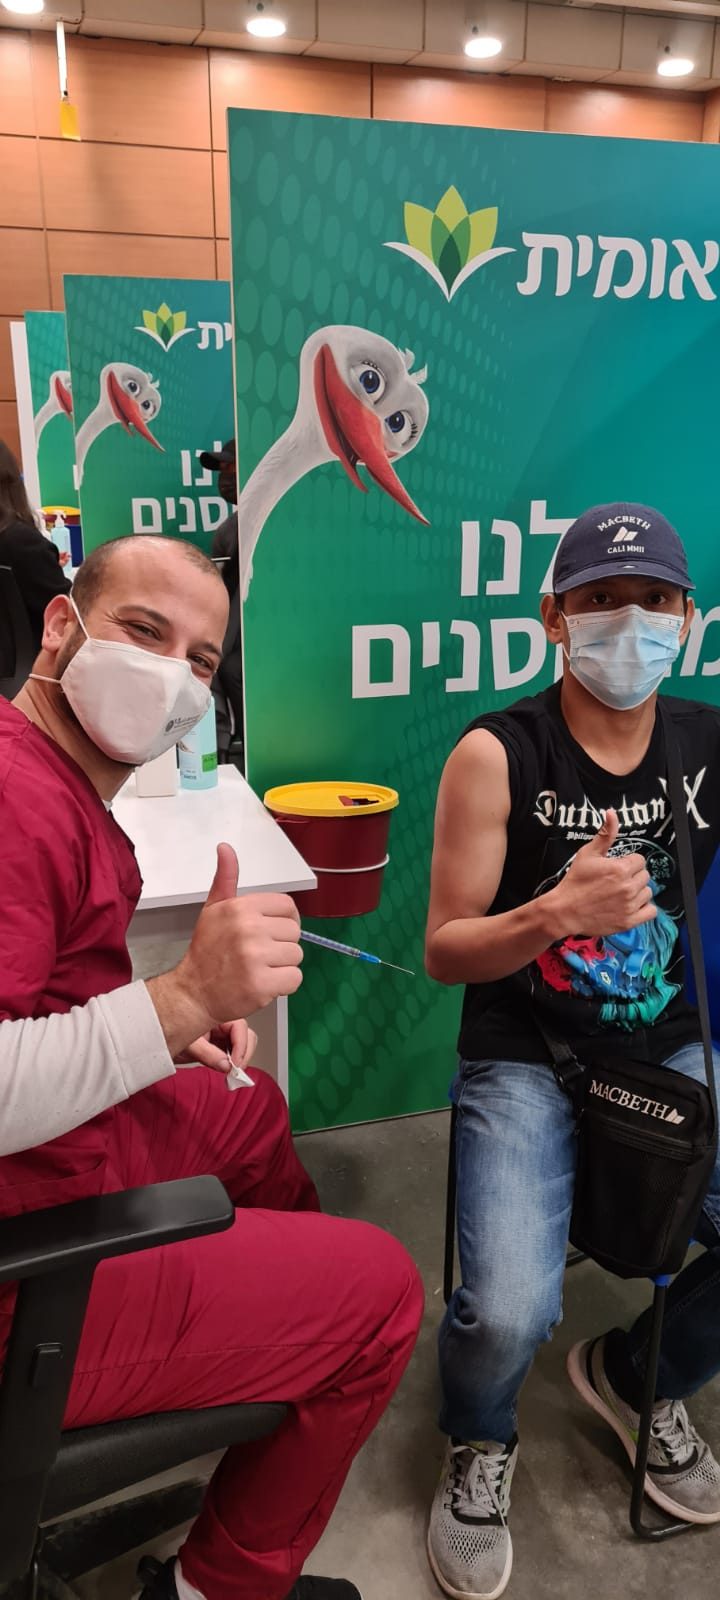 ‘Another way of thanking’: Israel vaccinates over 30,000 OFWs